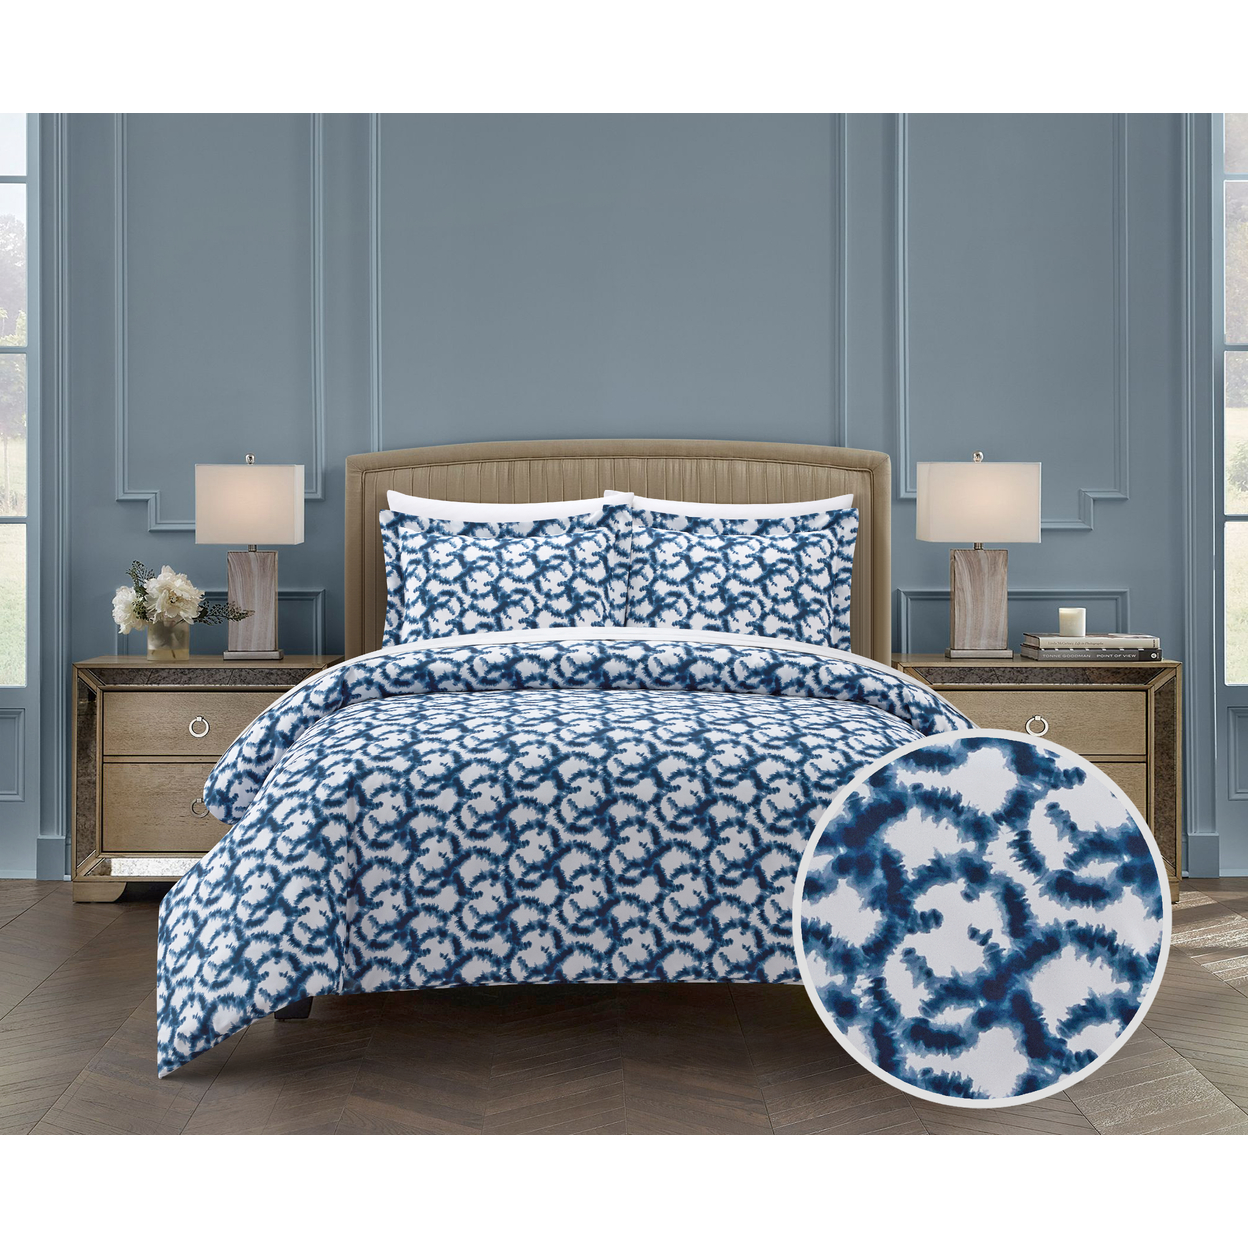 Khrissie 2 Or 3 Piece Duvet Cover Set Watercolor Overlapping Rings Pattern - Navy, Twin